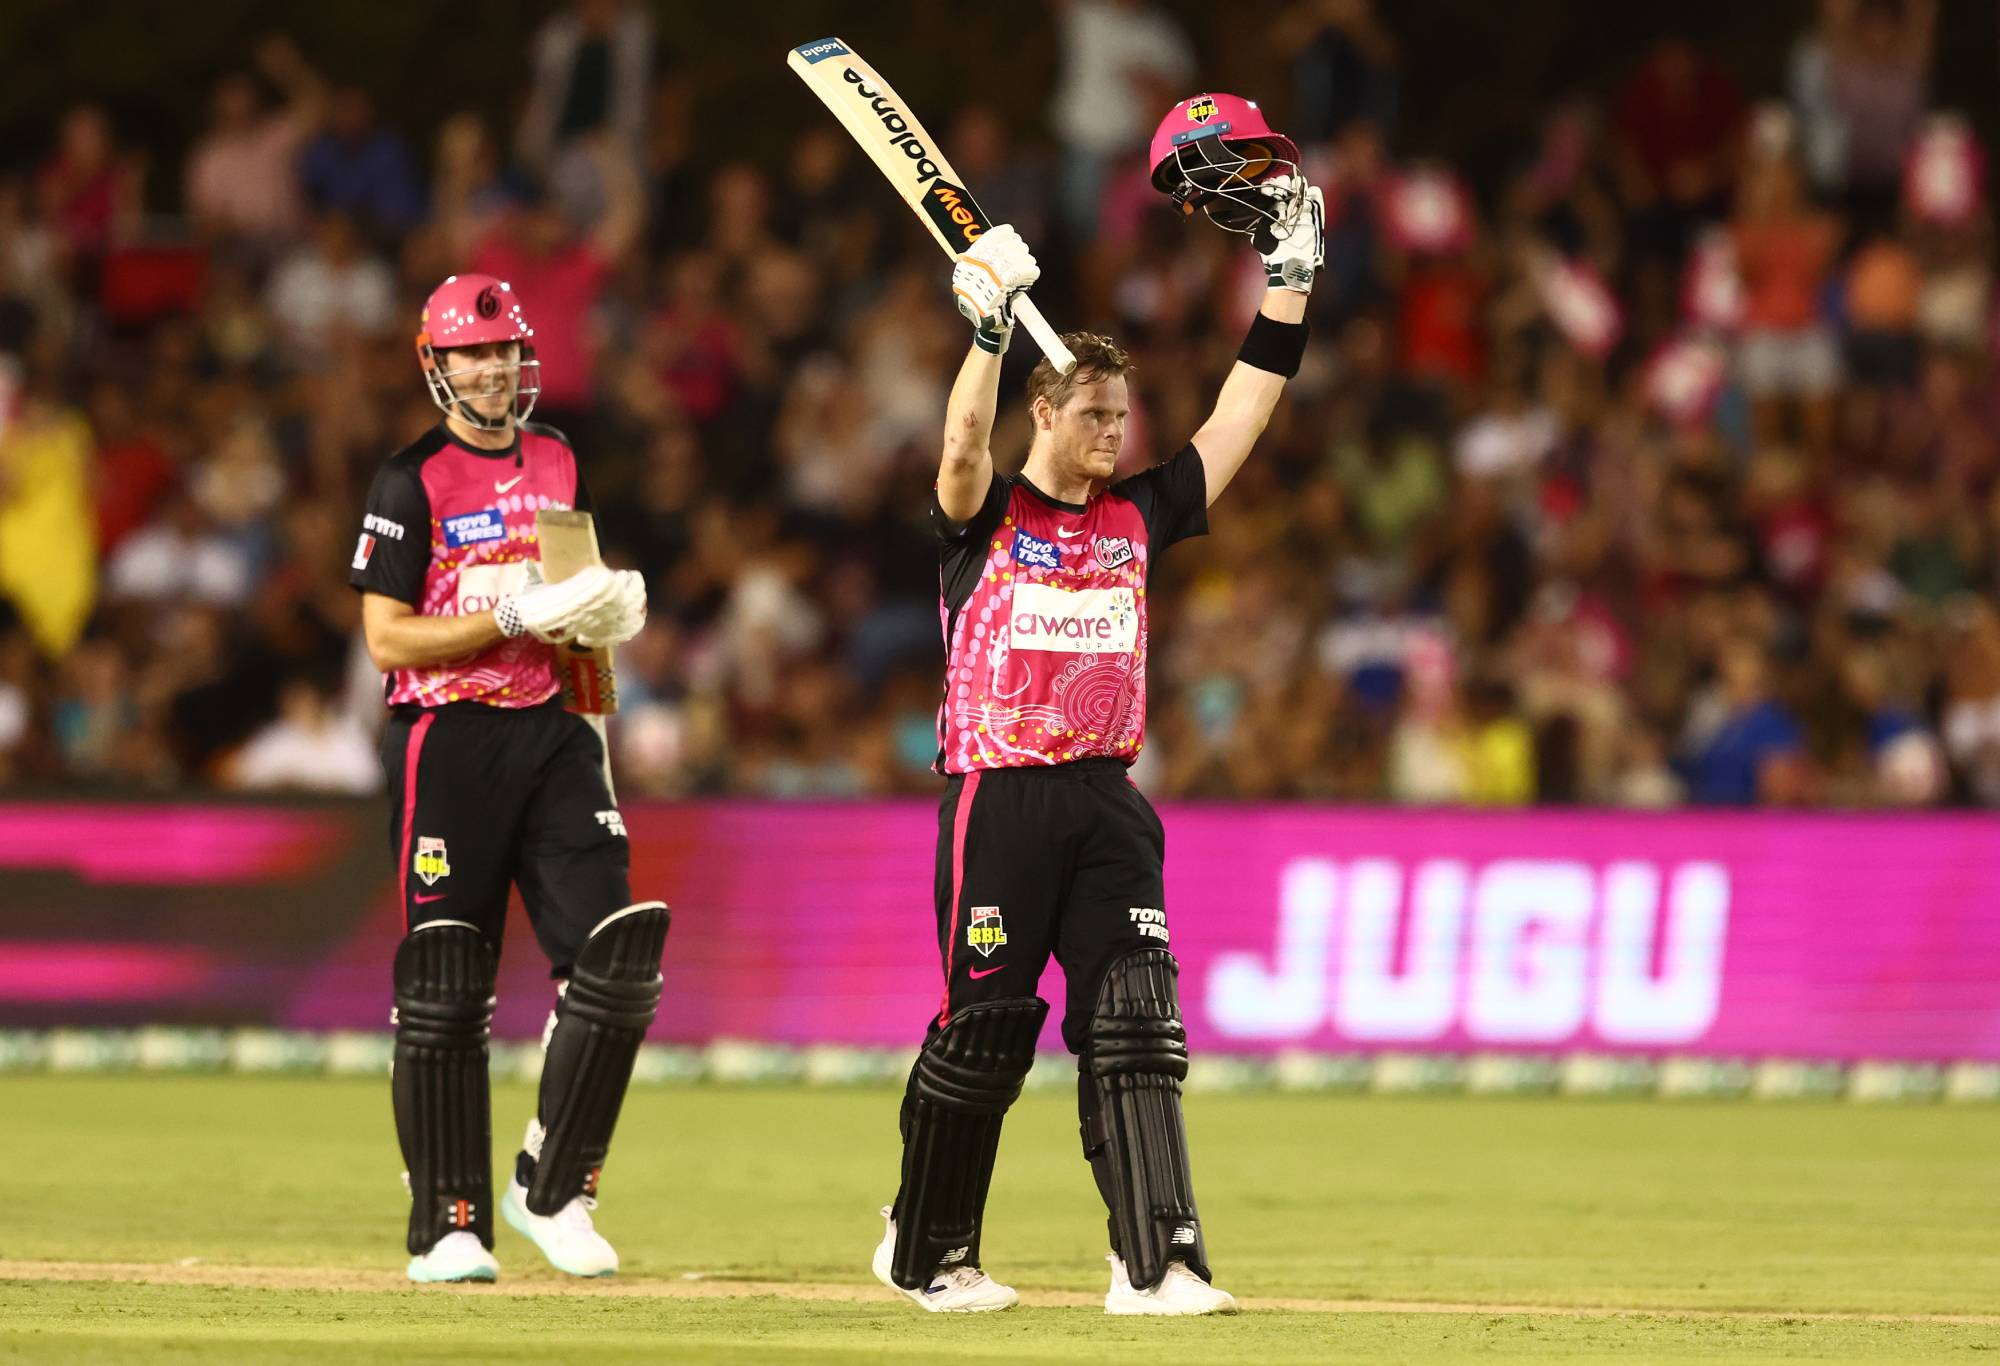 COFFS HARBOUR, AUSTRALIA - JANUARY 17: Steve Smith of the Sixers celebrates a century during the Men's Big Bash League match between the Sydney Sixers and the Adelaide Strikers at Coffs Harbour International Stadium, on January 17, 2023, in Coffs Harbour, Australia. (Photo by Chris Hyde/Getty Images)